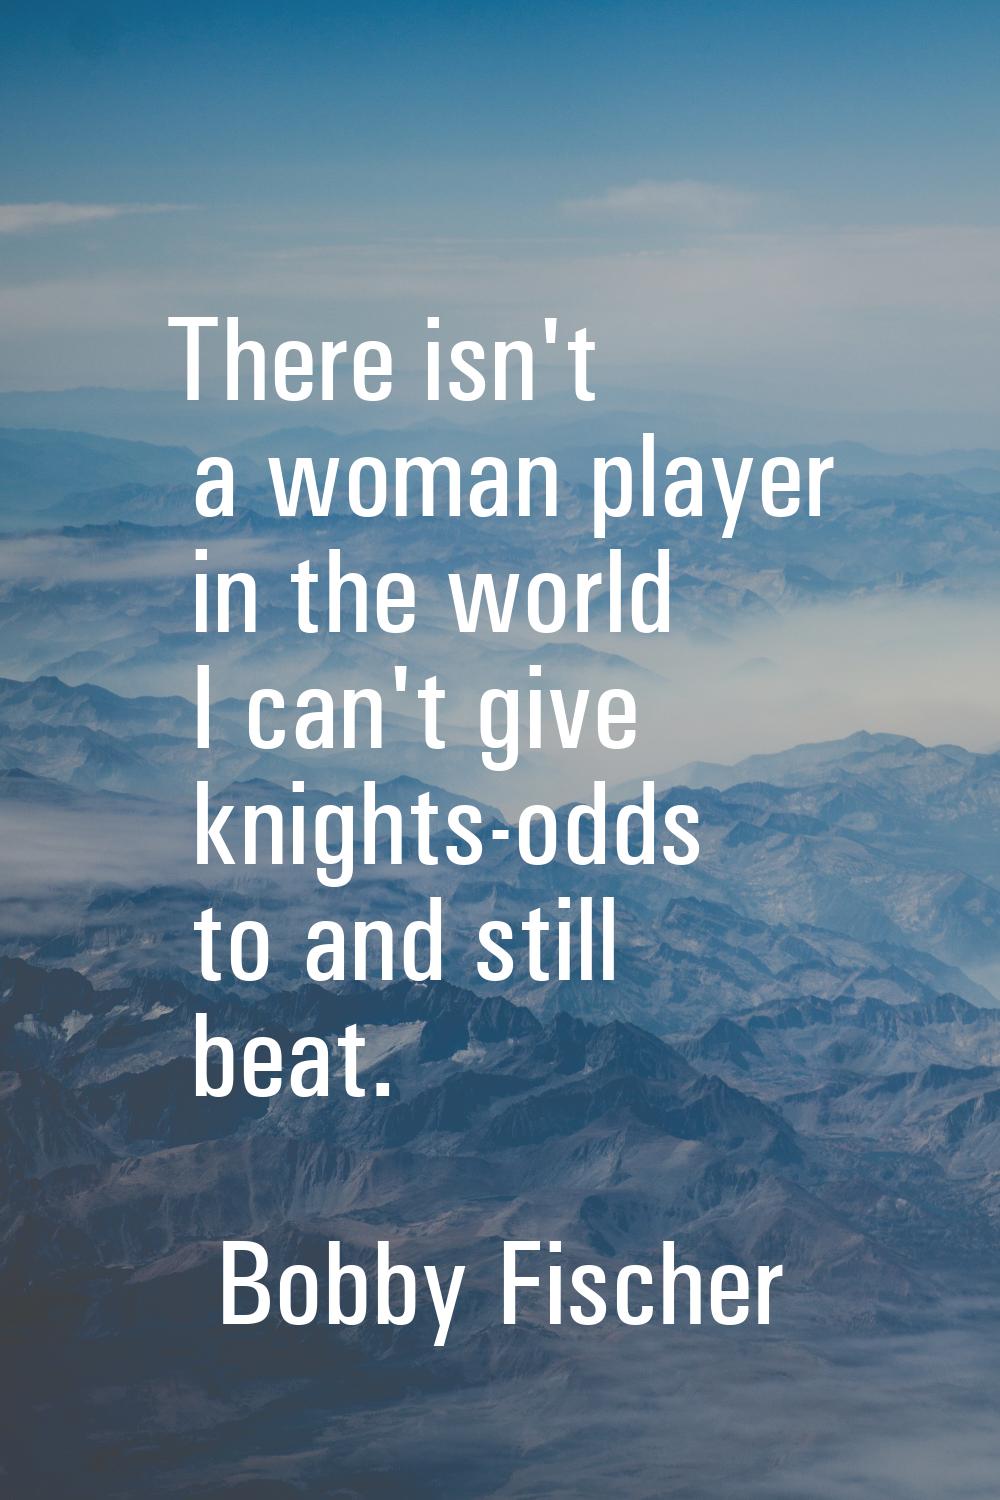 There isn't a woman player in the world I can't give knights-odds to and still beat.